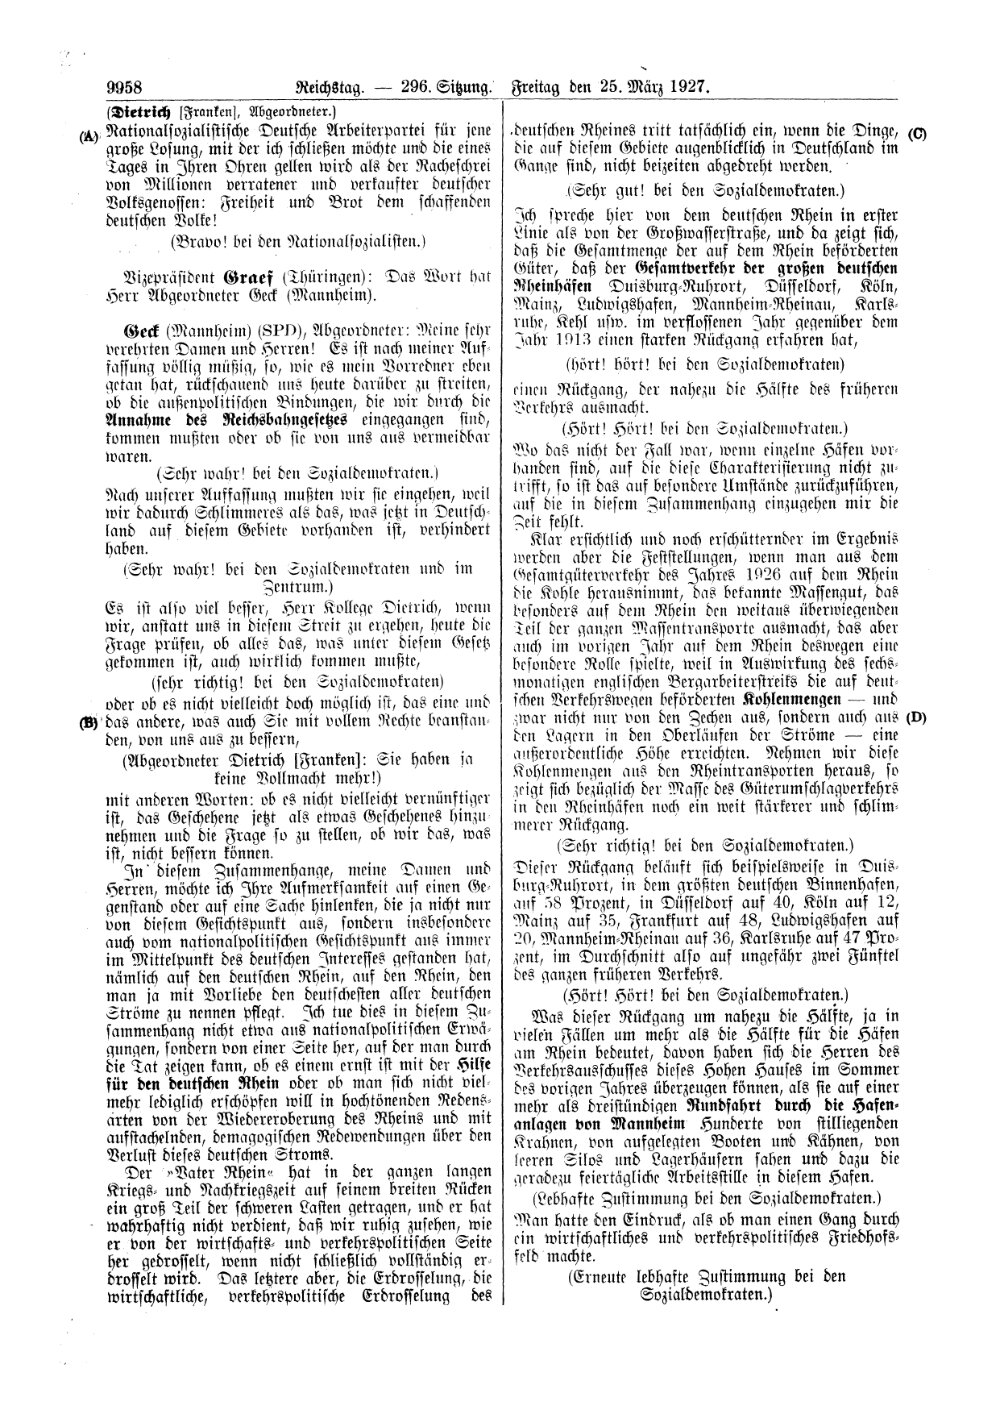 Scan of page 9958